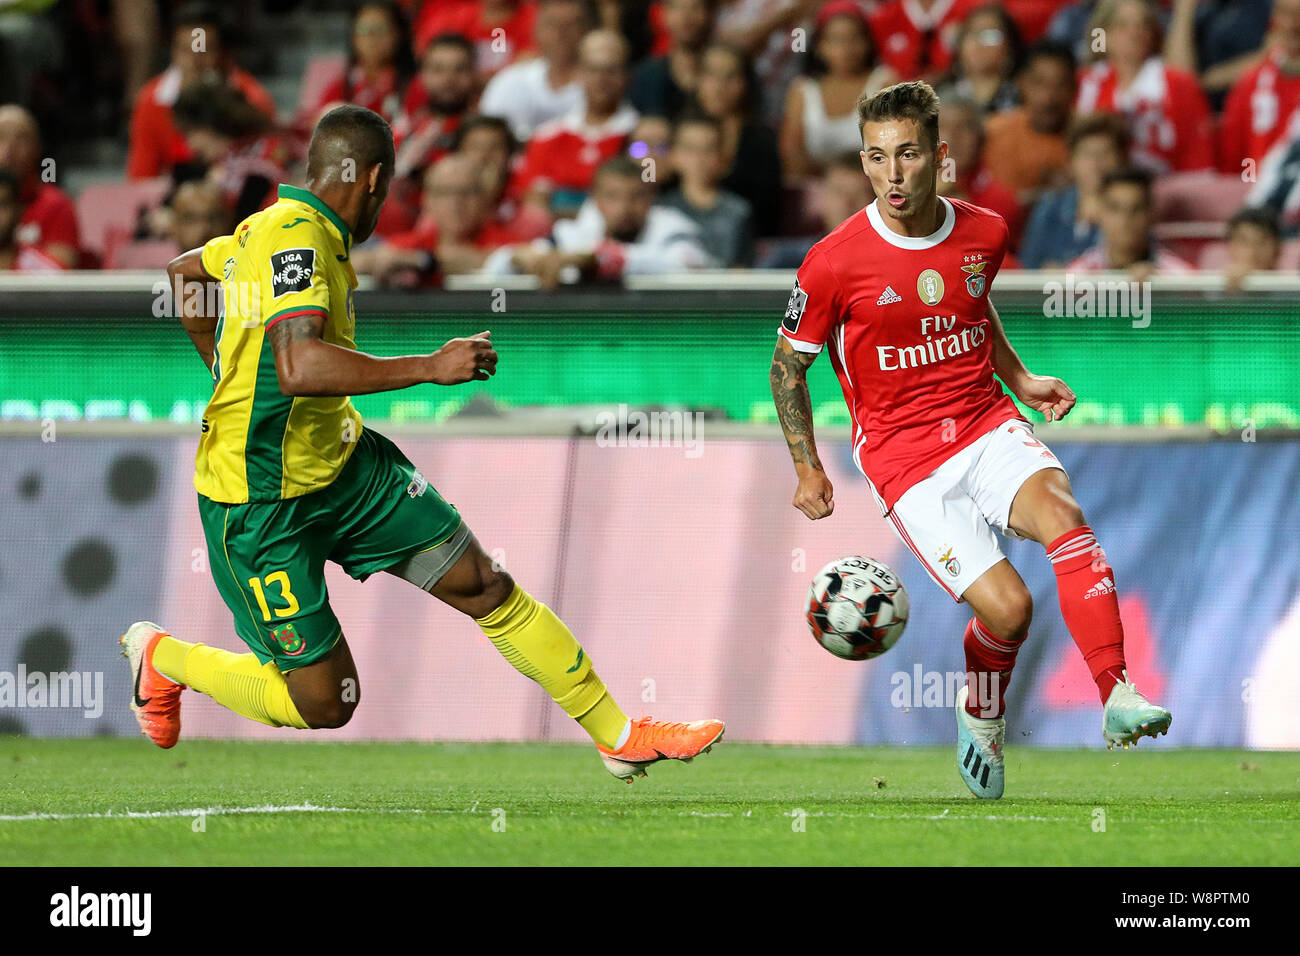 Lisbon, Portugal. 10th Aug, 2019. Álex Grimaldo of SL Benfica in action during the League NOS 2019/20 footballl match between SL Benfica vs FC Paços de Ferreira. (Final score: SL Benfica 5 - 0 FC Paços de Ferreira) Credit: SOPA Images Limited/Alamy Live News Stock Photo